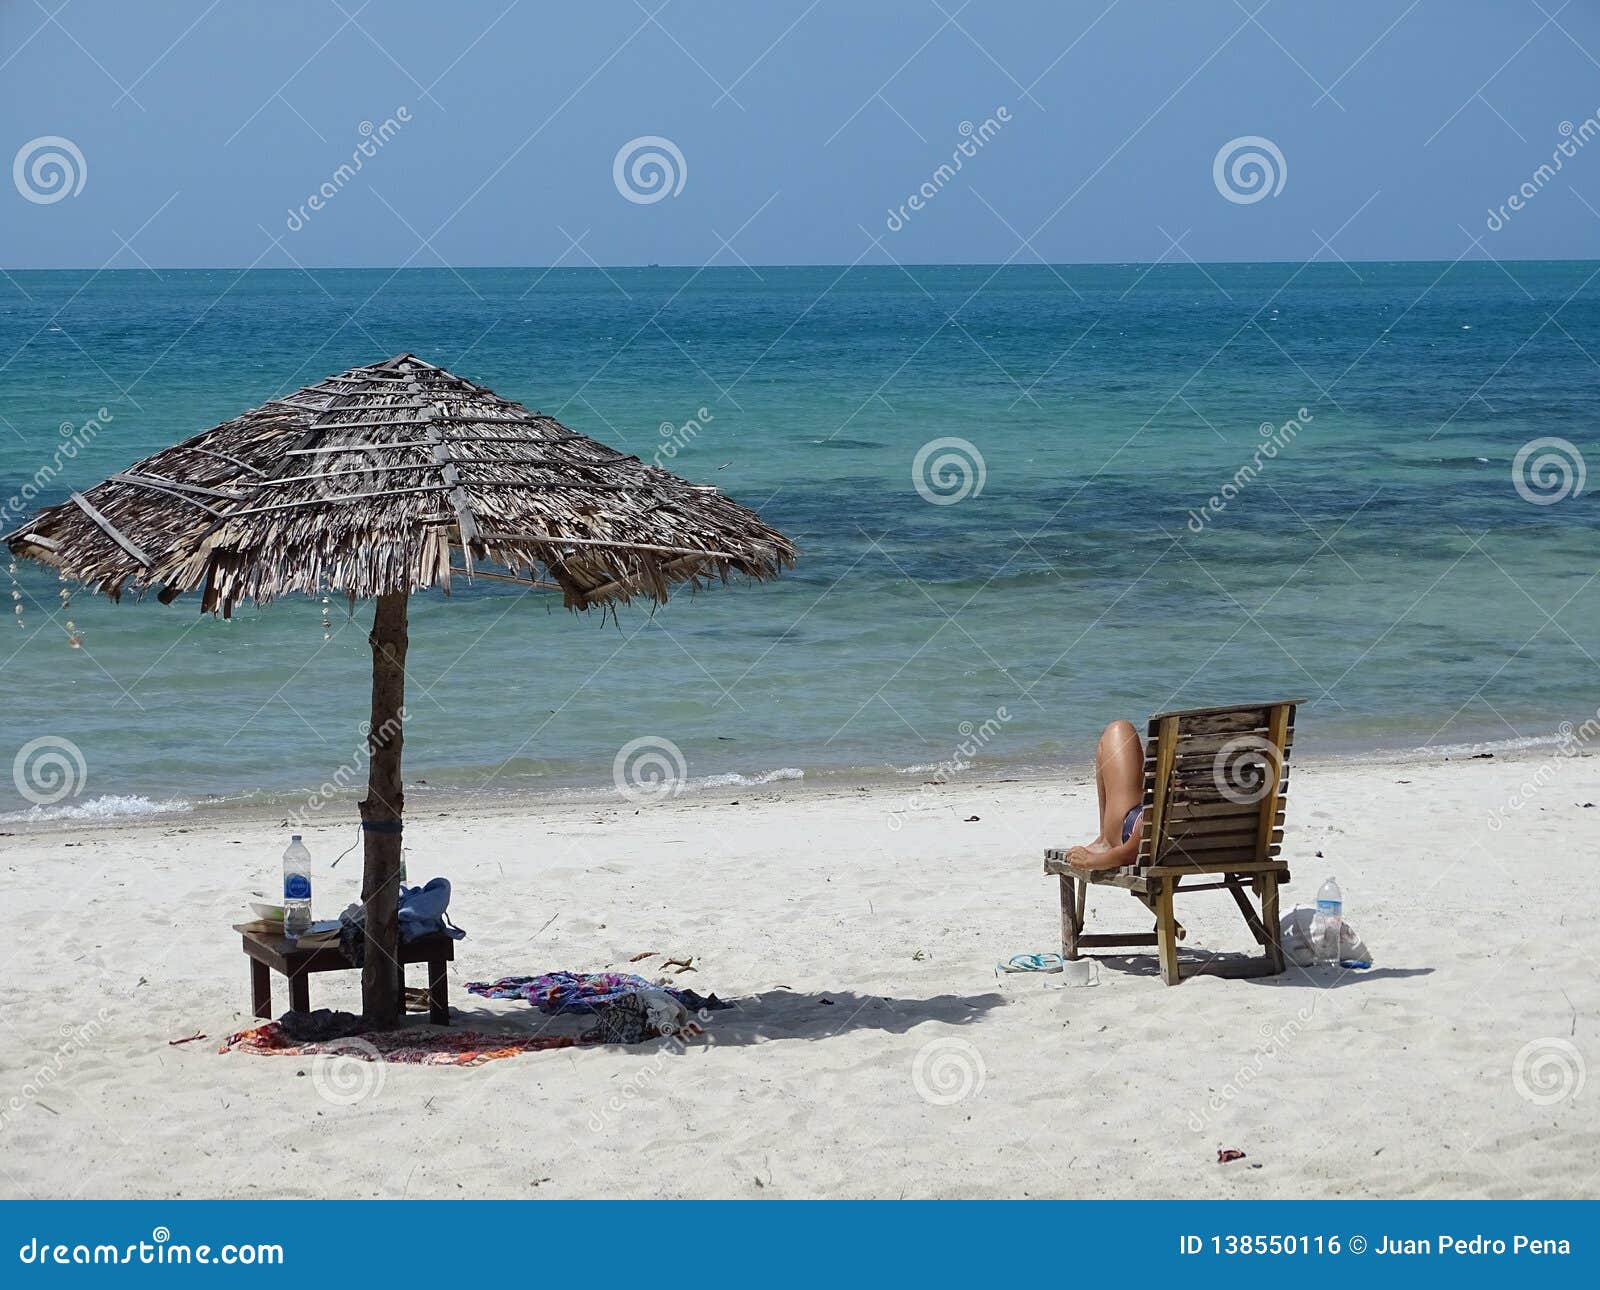 tropical beach with white sand, blue water and parasol